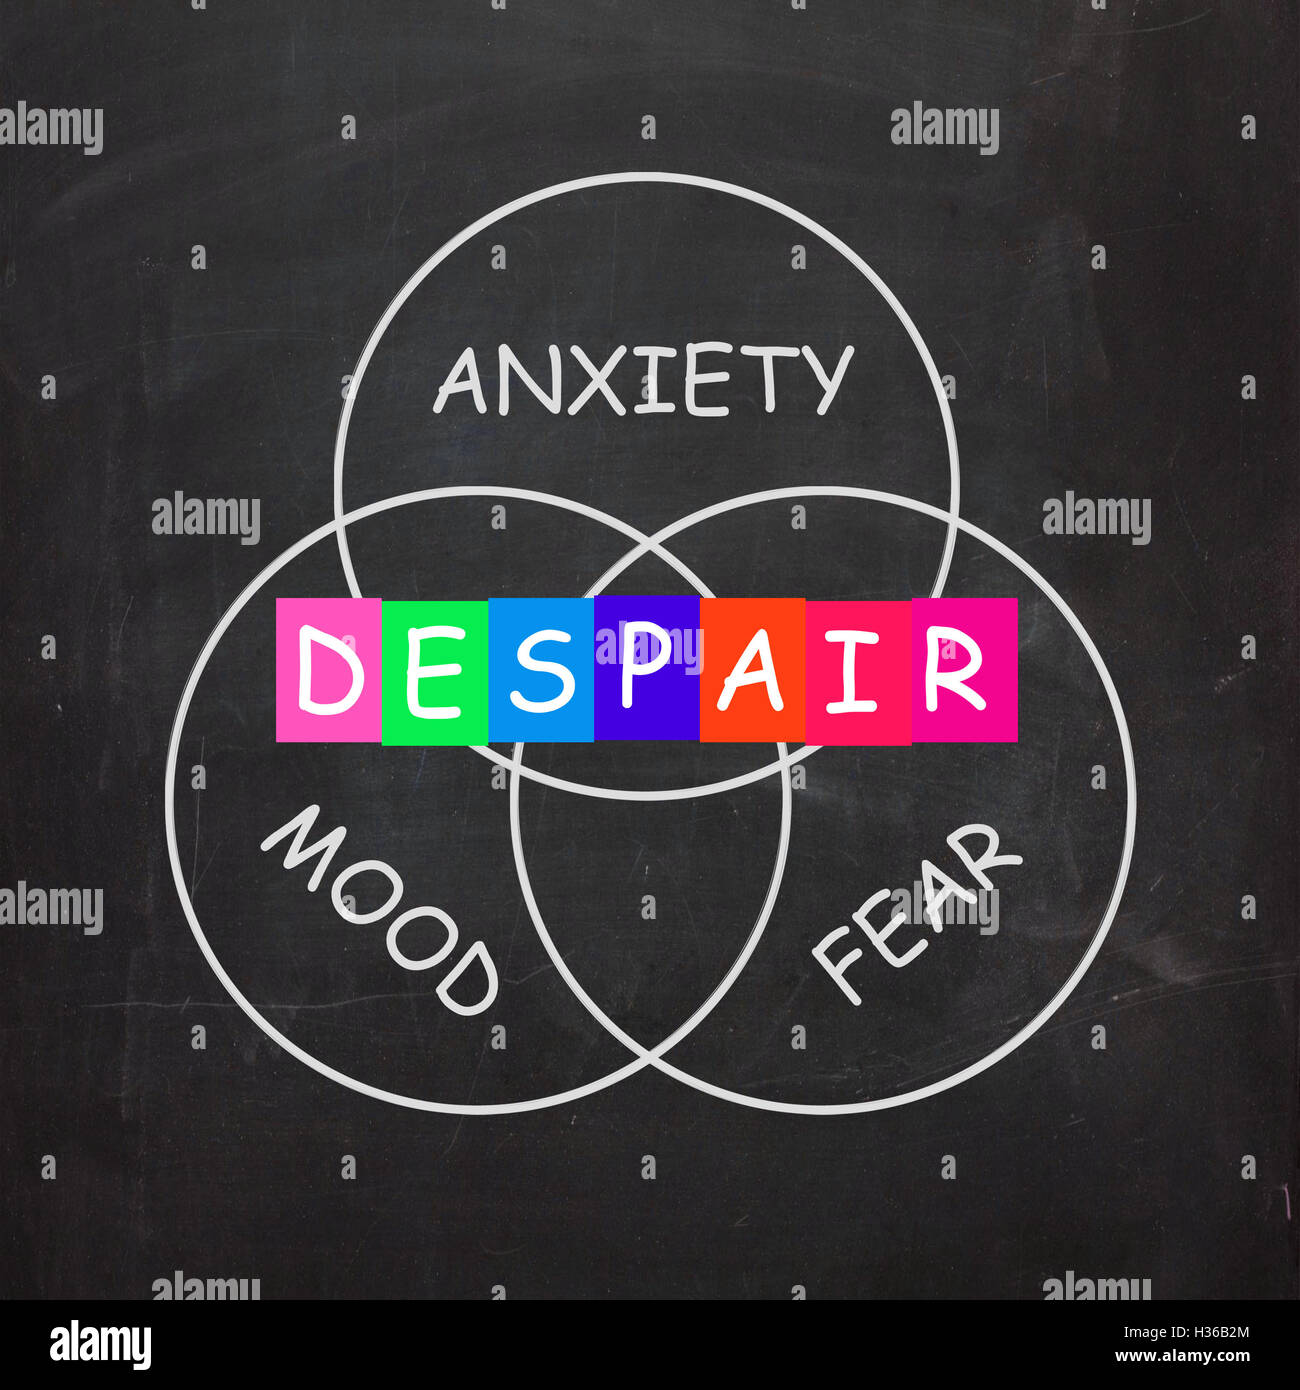 Despair Indicates a Mood of Fear and Anxiety Stock Photo